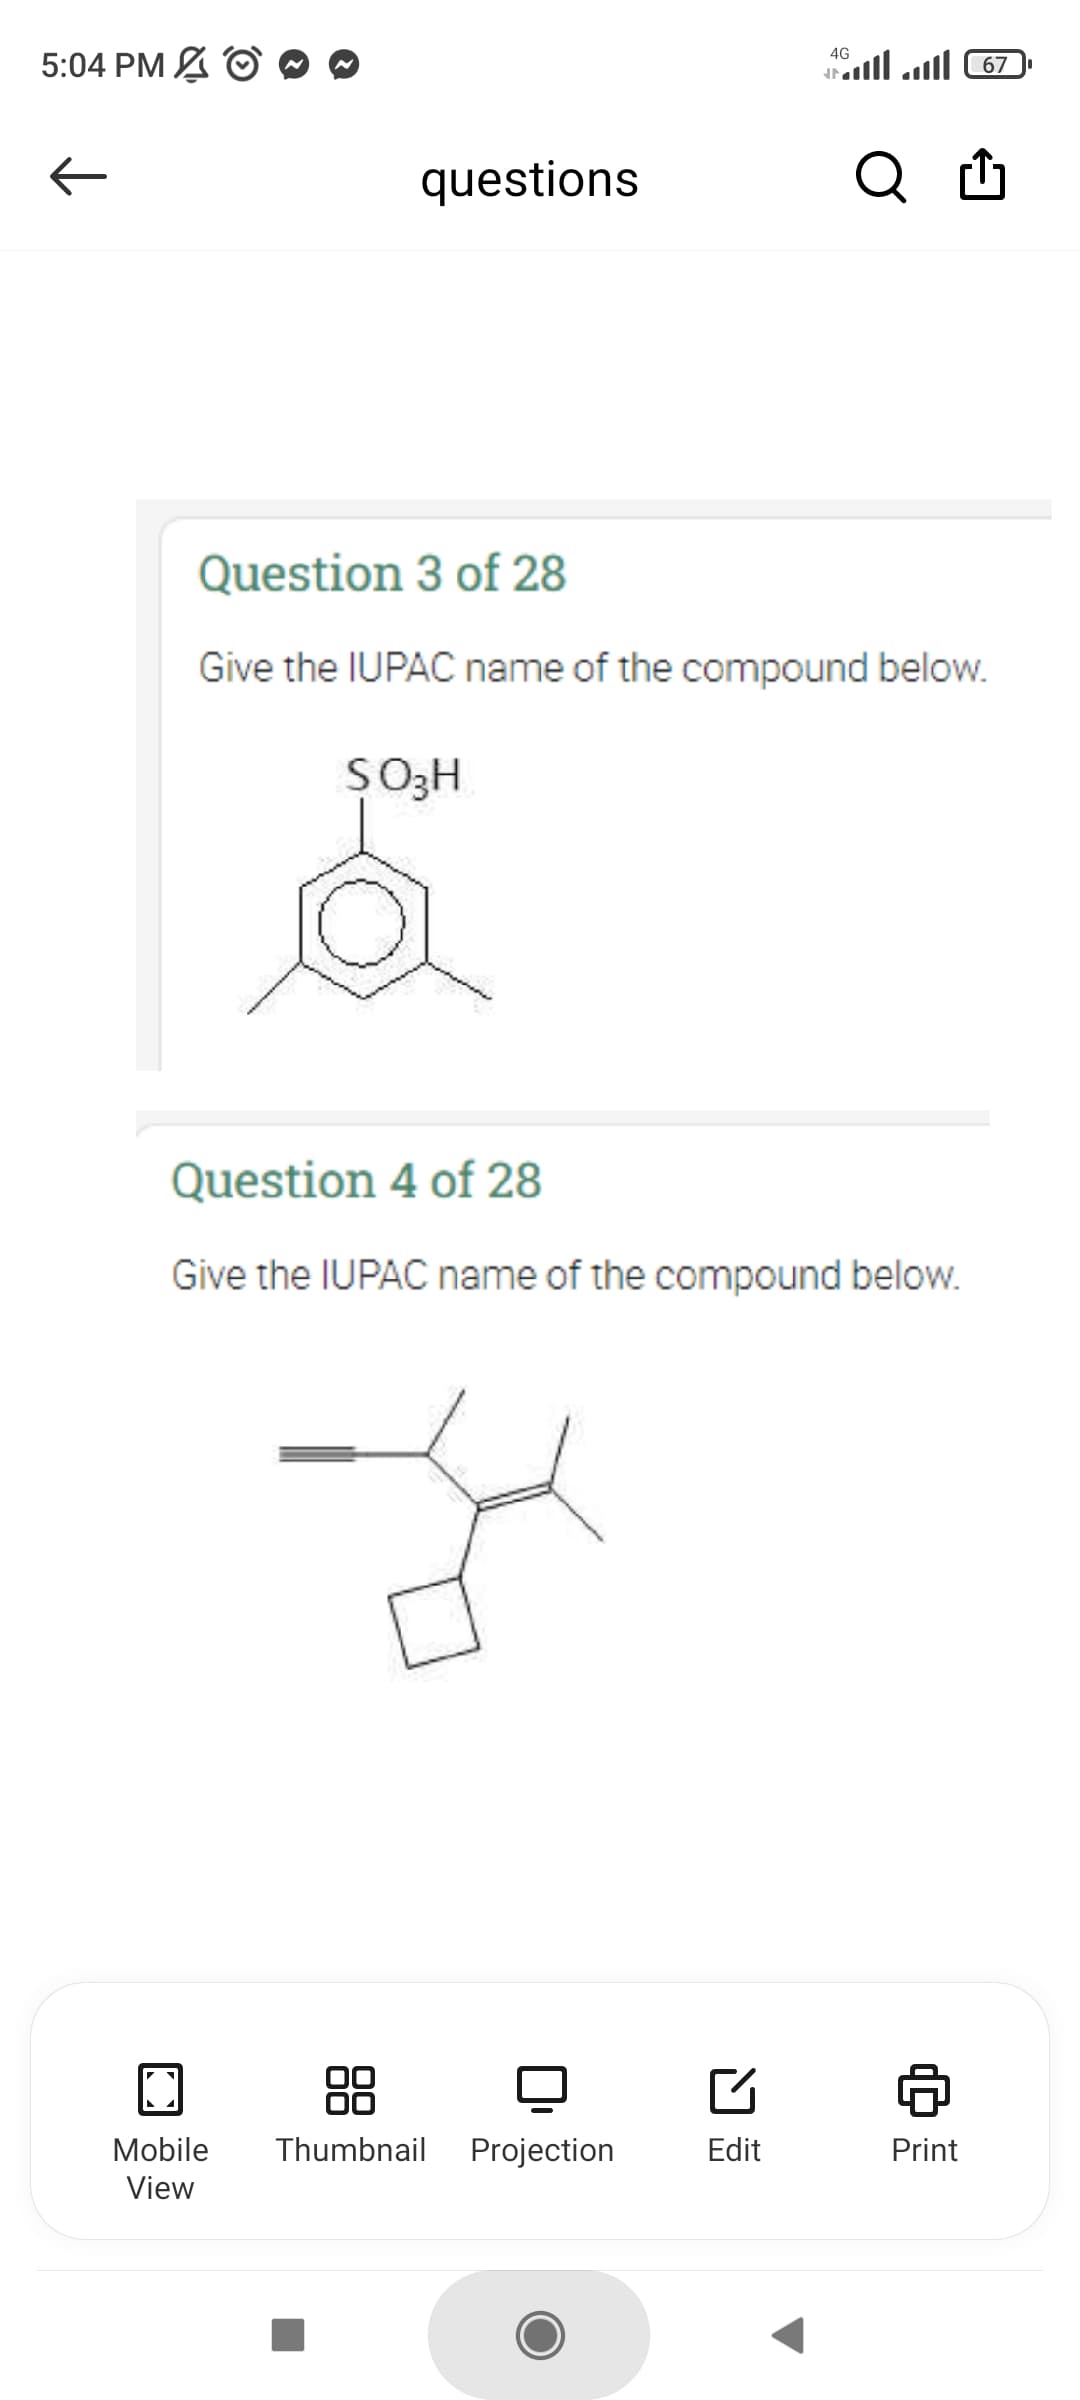 5:04 PM
←
questions
Question 3 of 28
Give the IUPAC name of the compound below.
SO3H
*
4G
J
Question 4 of 28
Give the IUPAC name of the compound below.
Mobile Thumbnail Projection
View
All ll (67
G
Edit
+
Print